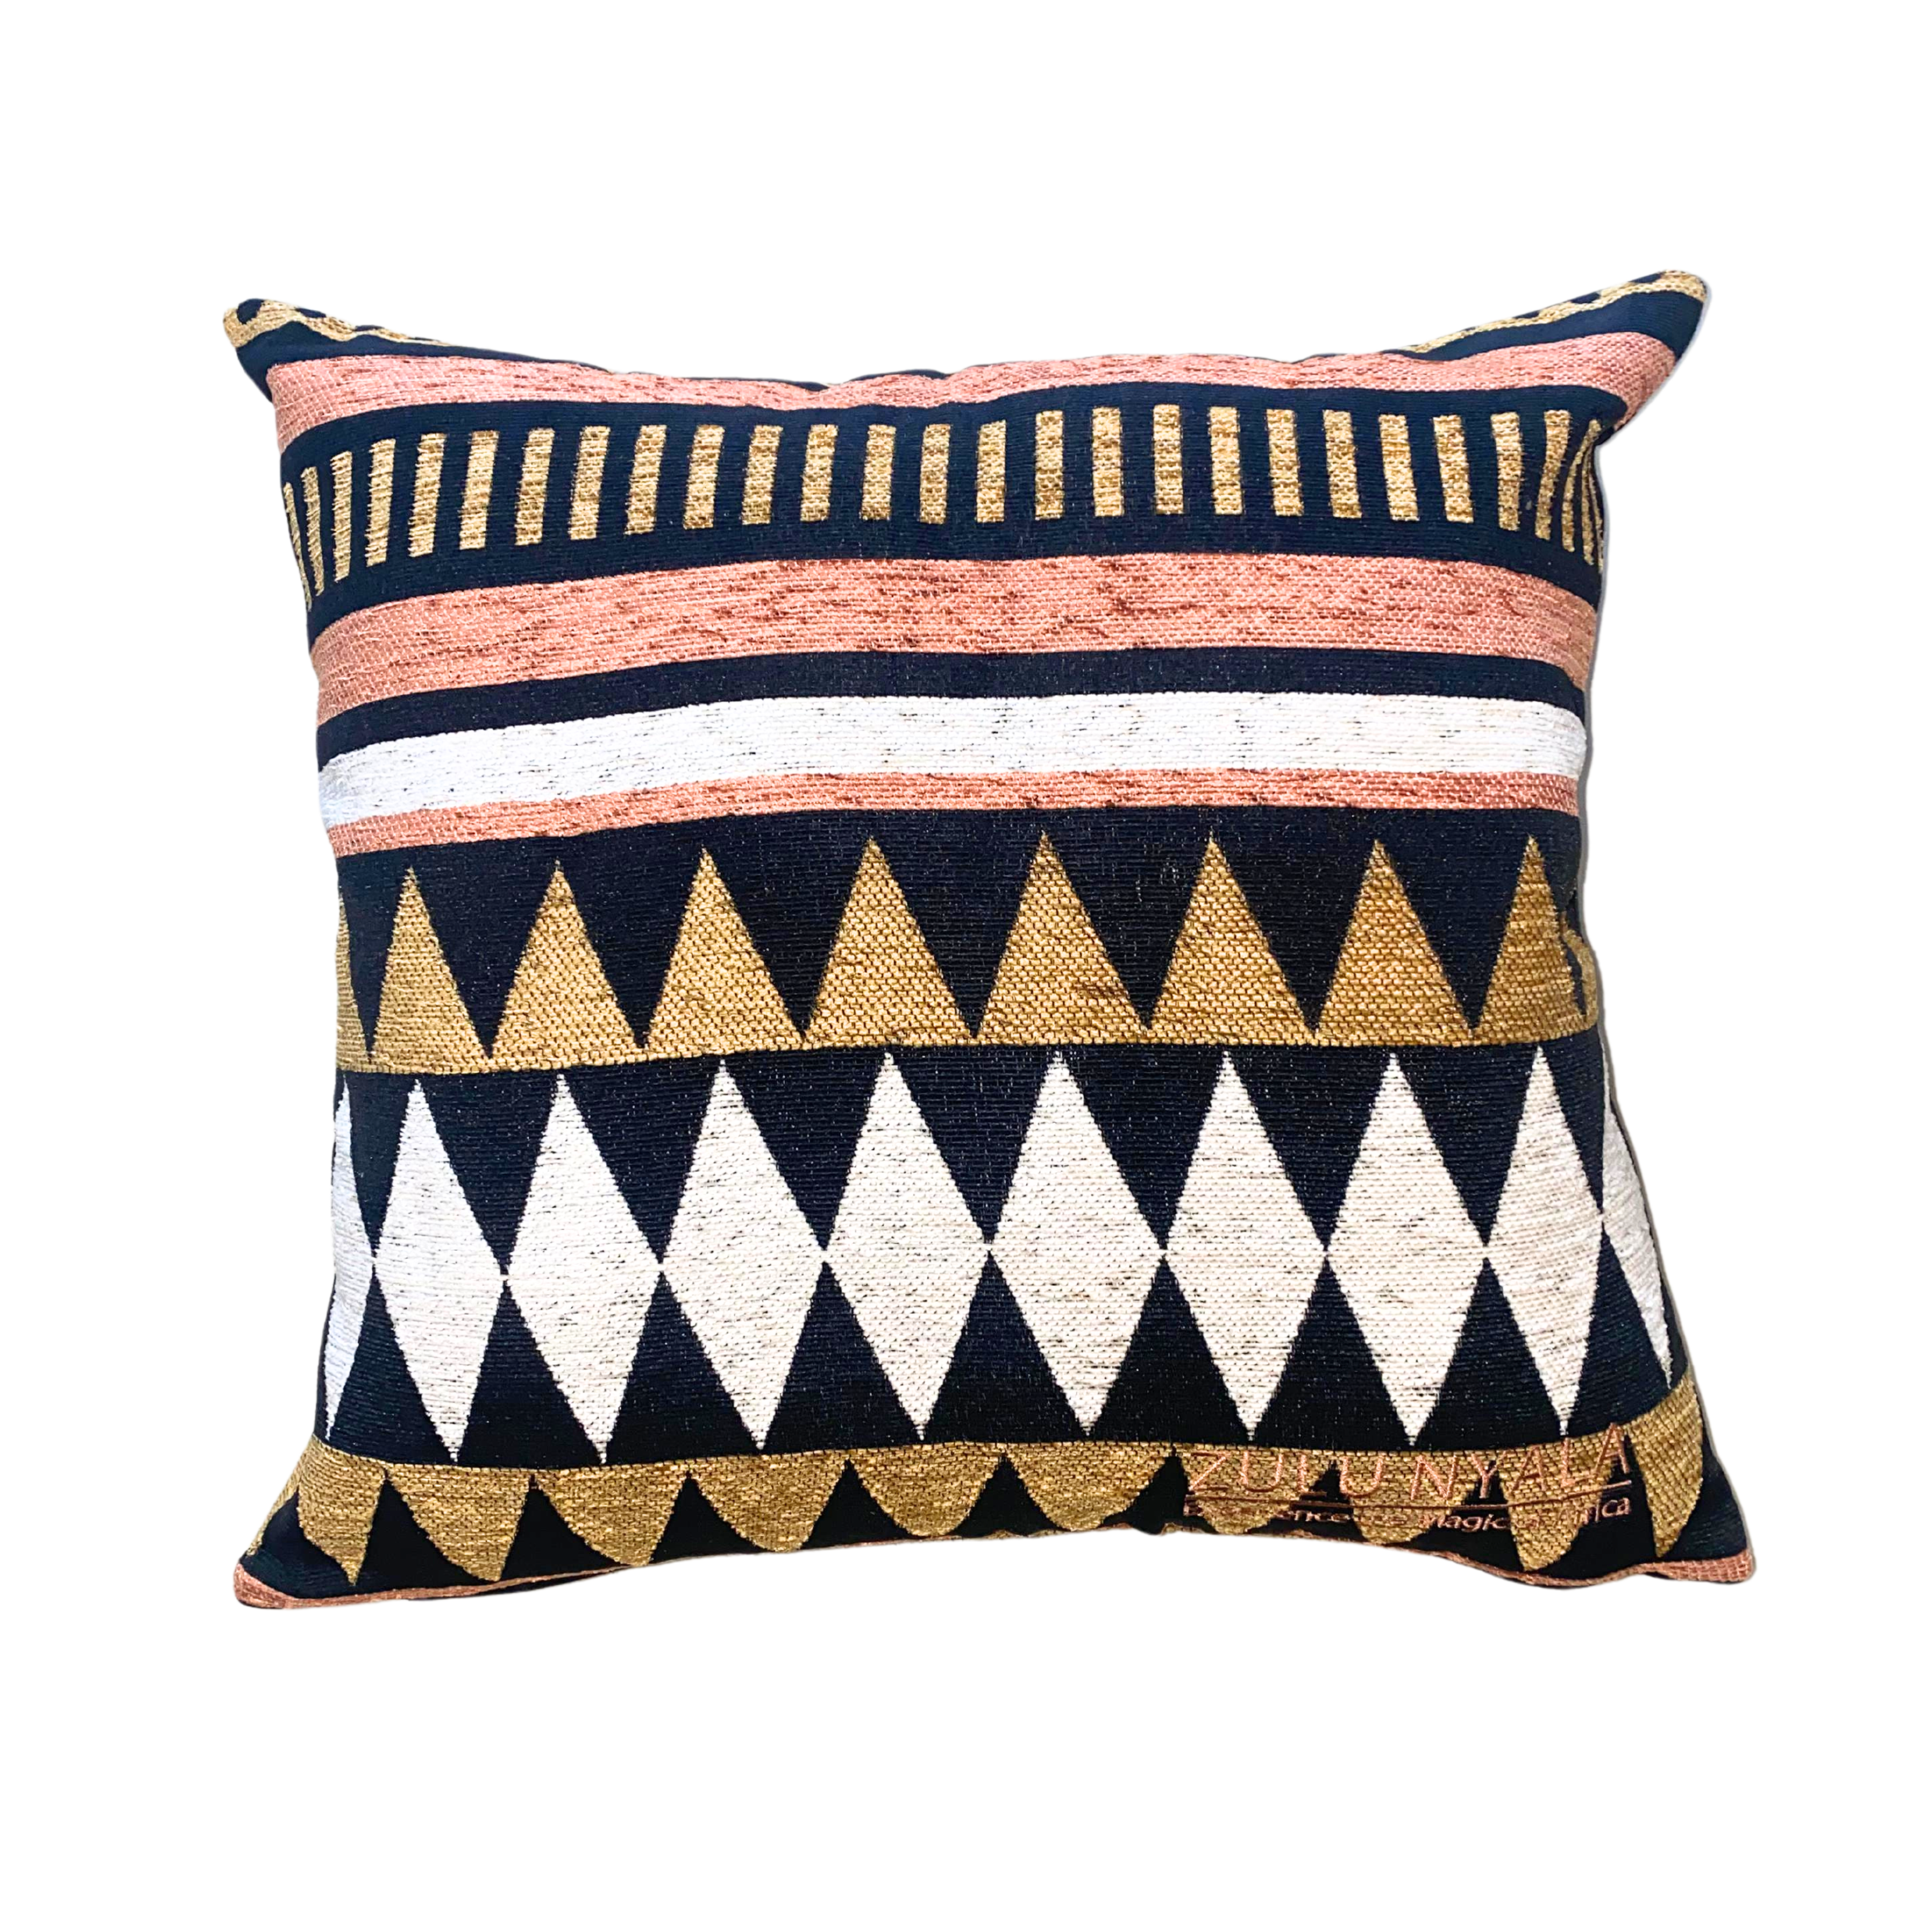 African Inspired Cushion Covers